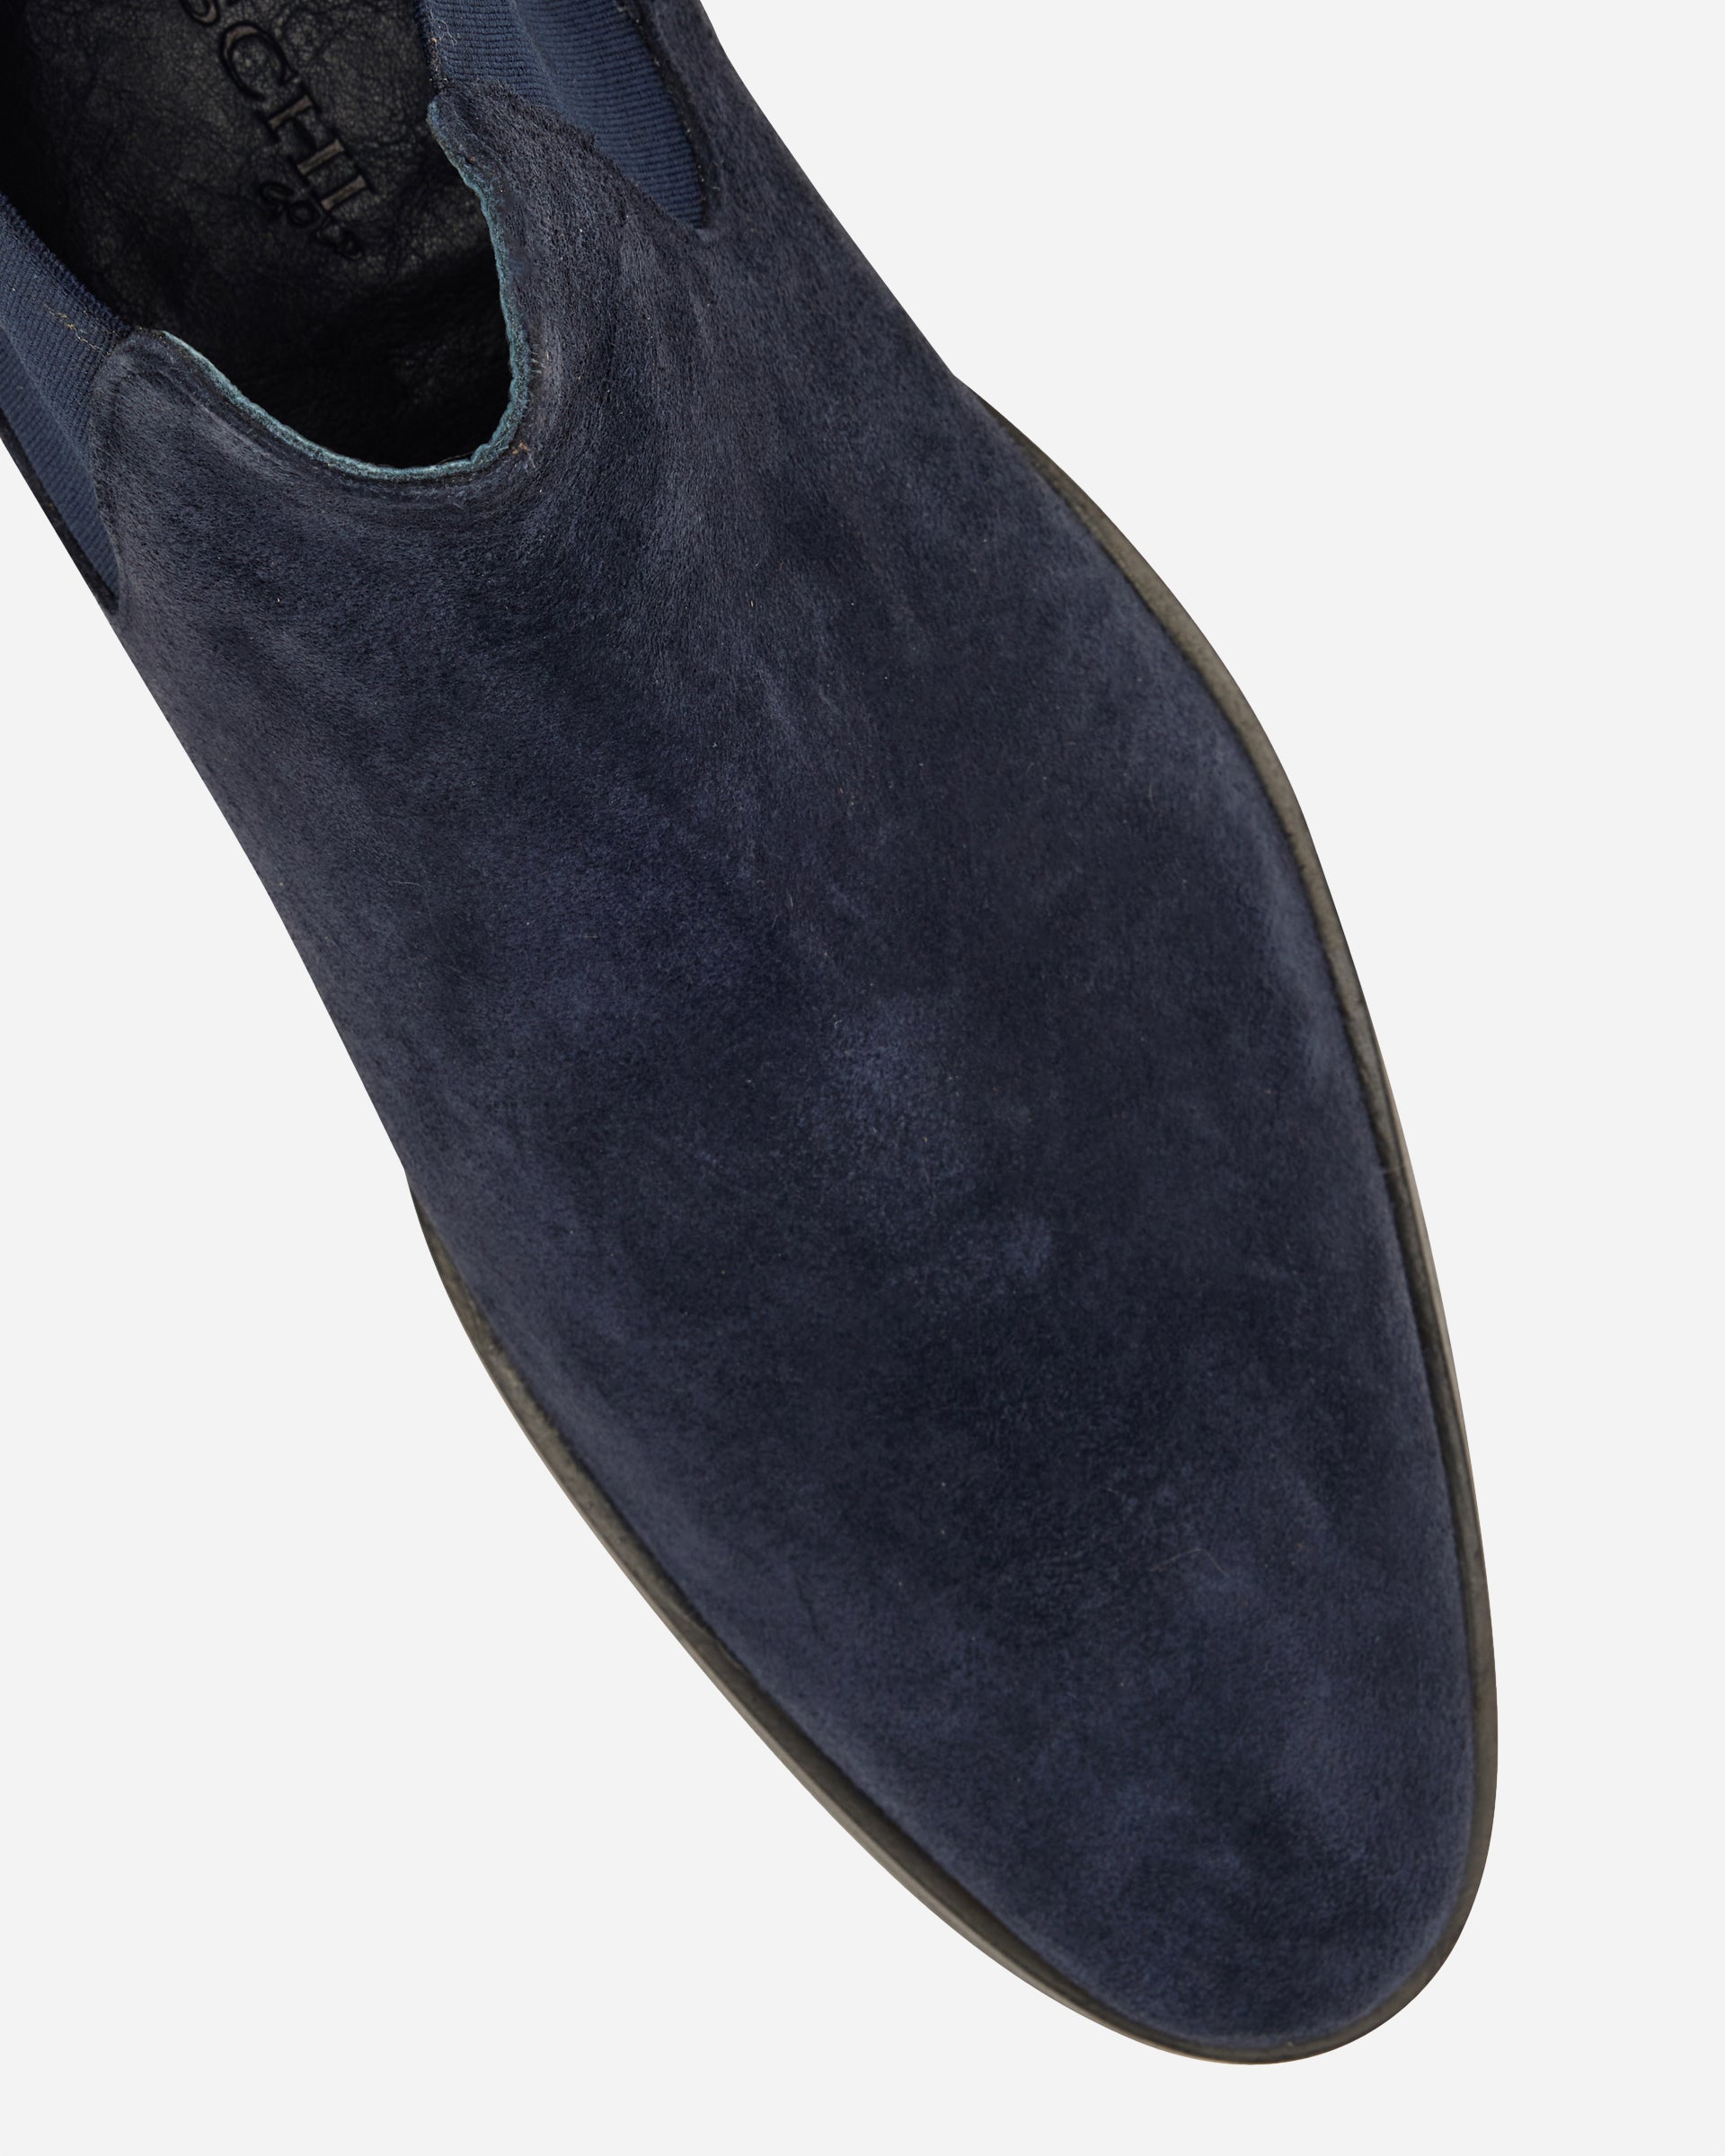 I Maschi Navy Suede Chelsea Boot - Men's Shoes at Menzclub